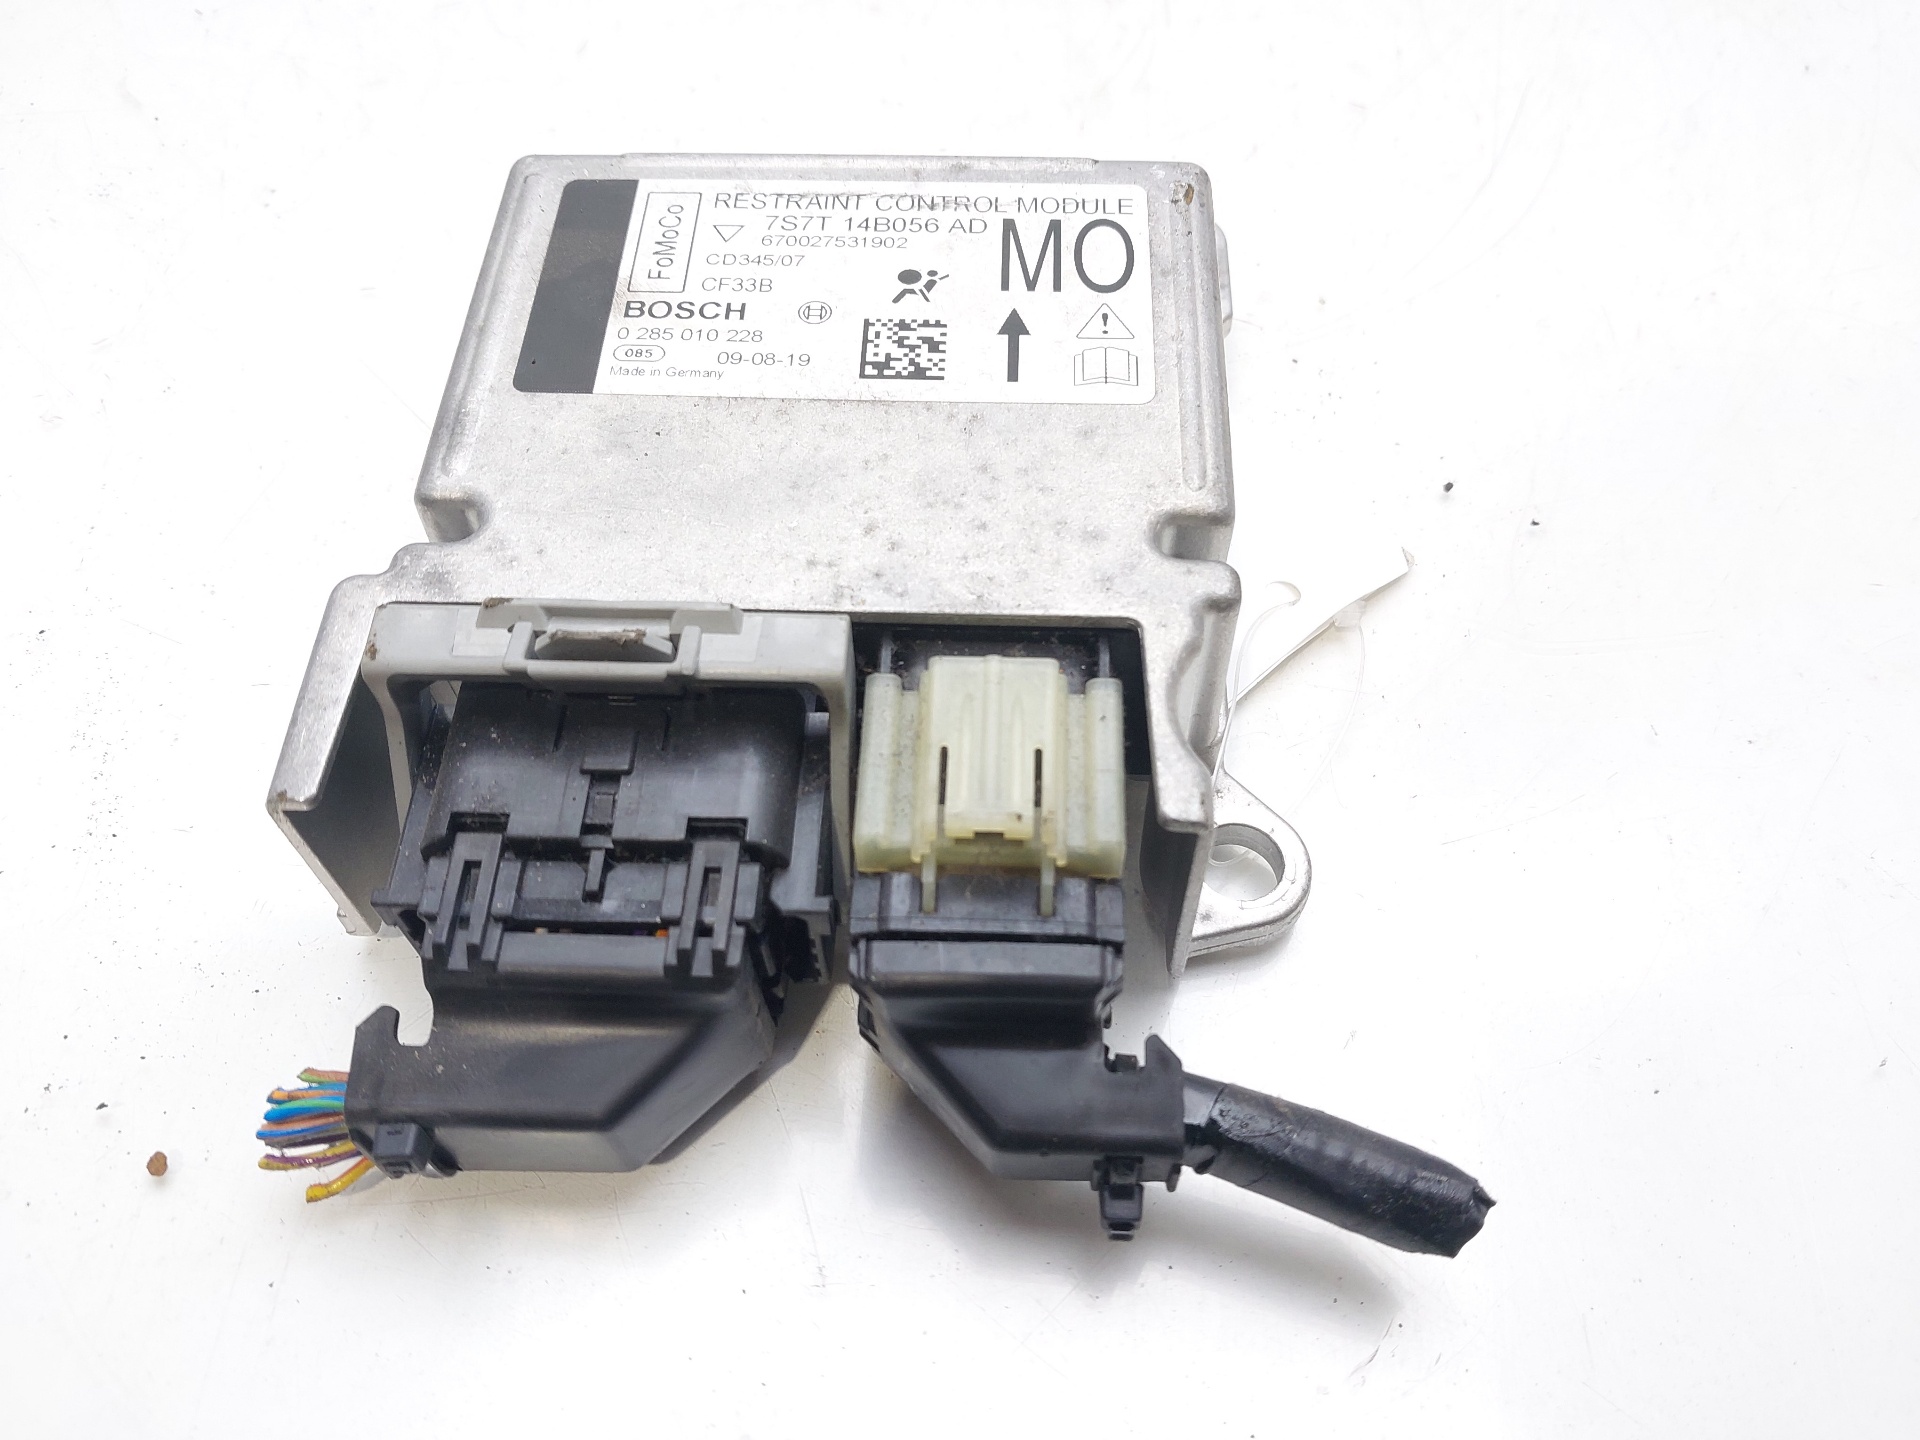 FORD Mondeo 4 generation (2007-2015) SRS Control Unit 7S7T14B056AD 20425718